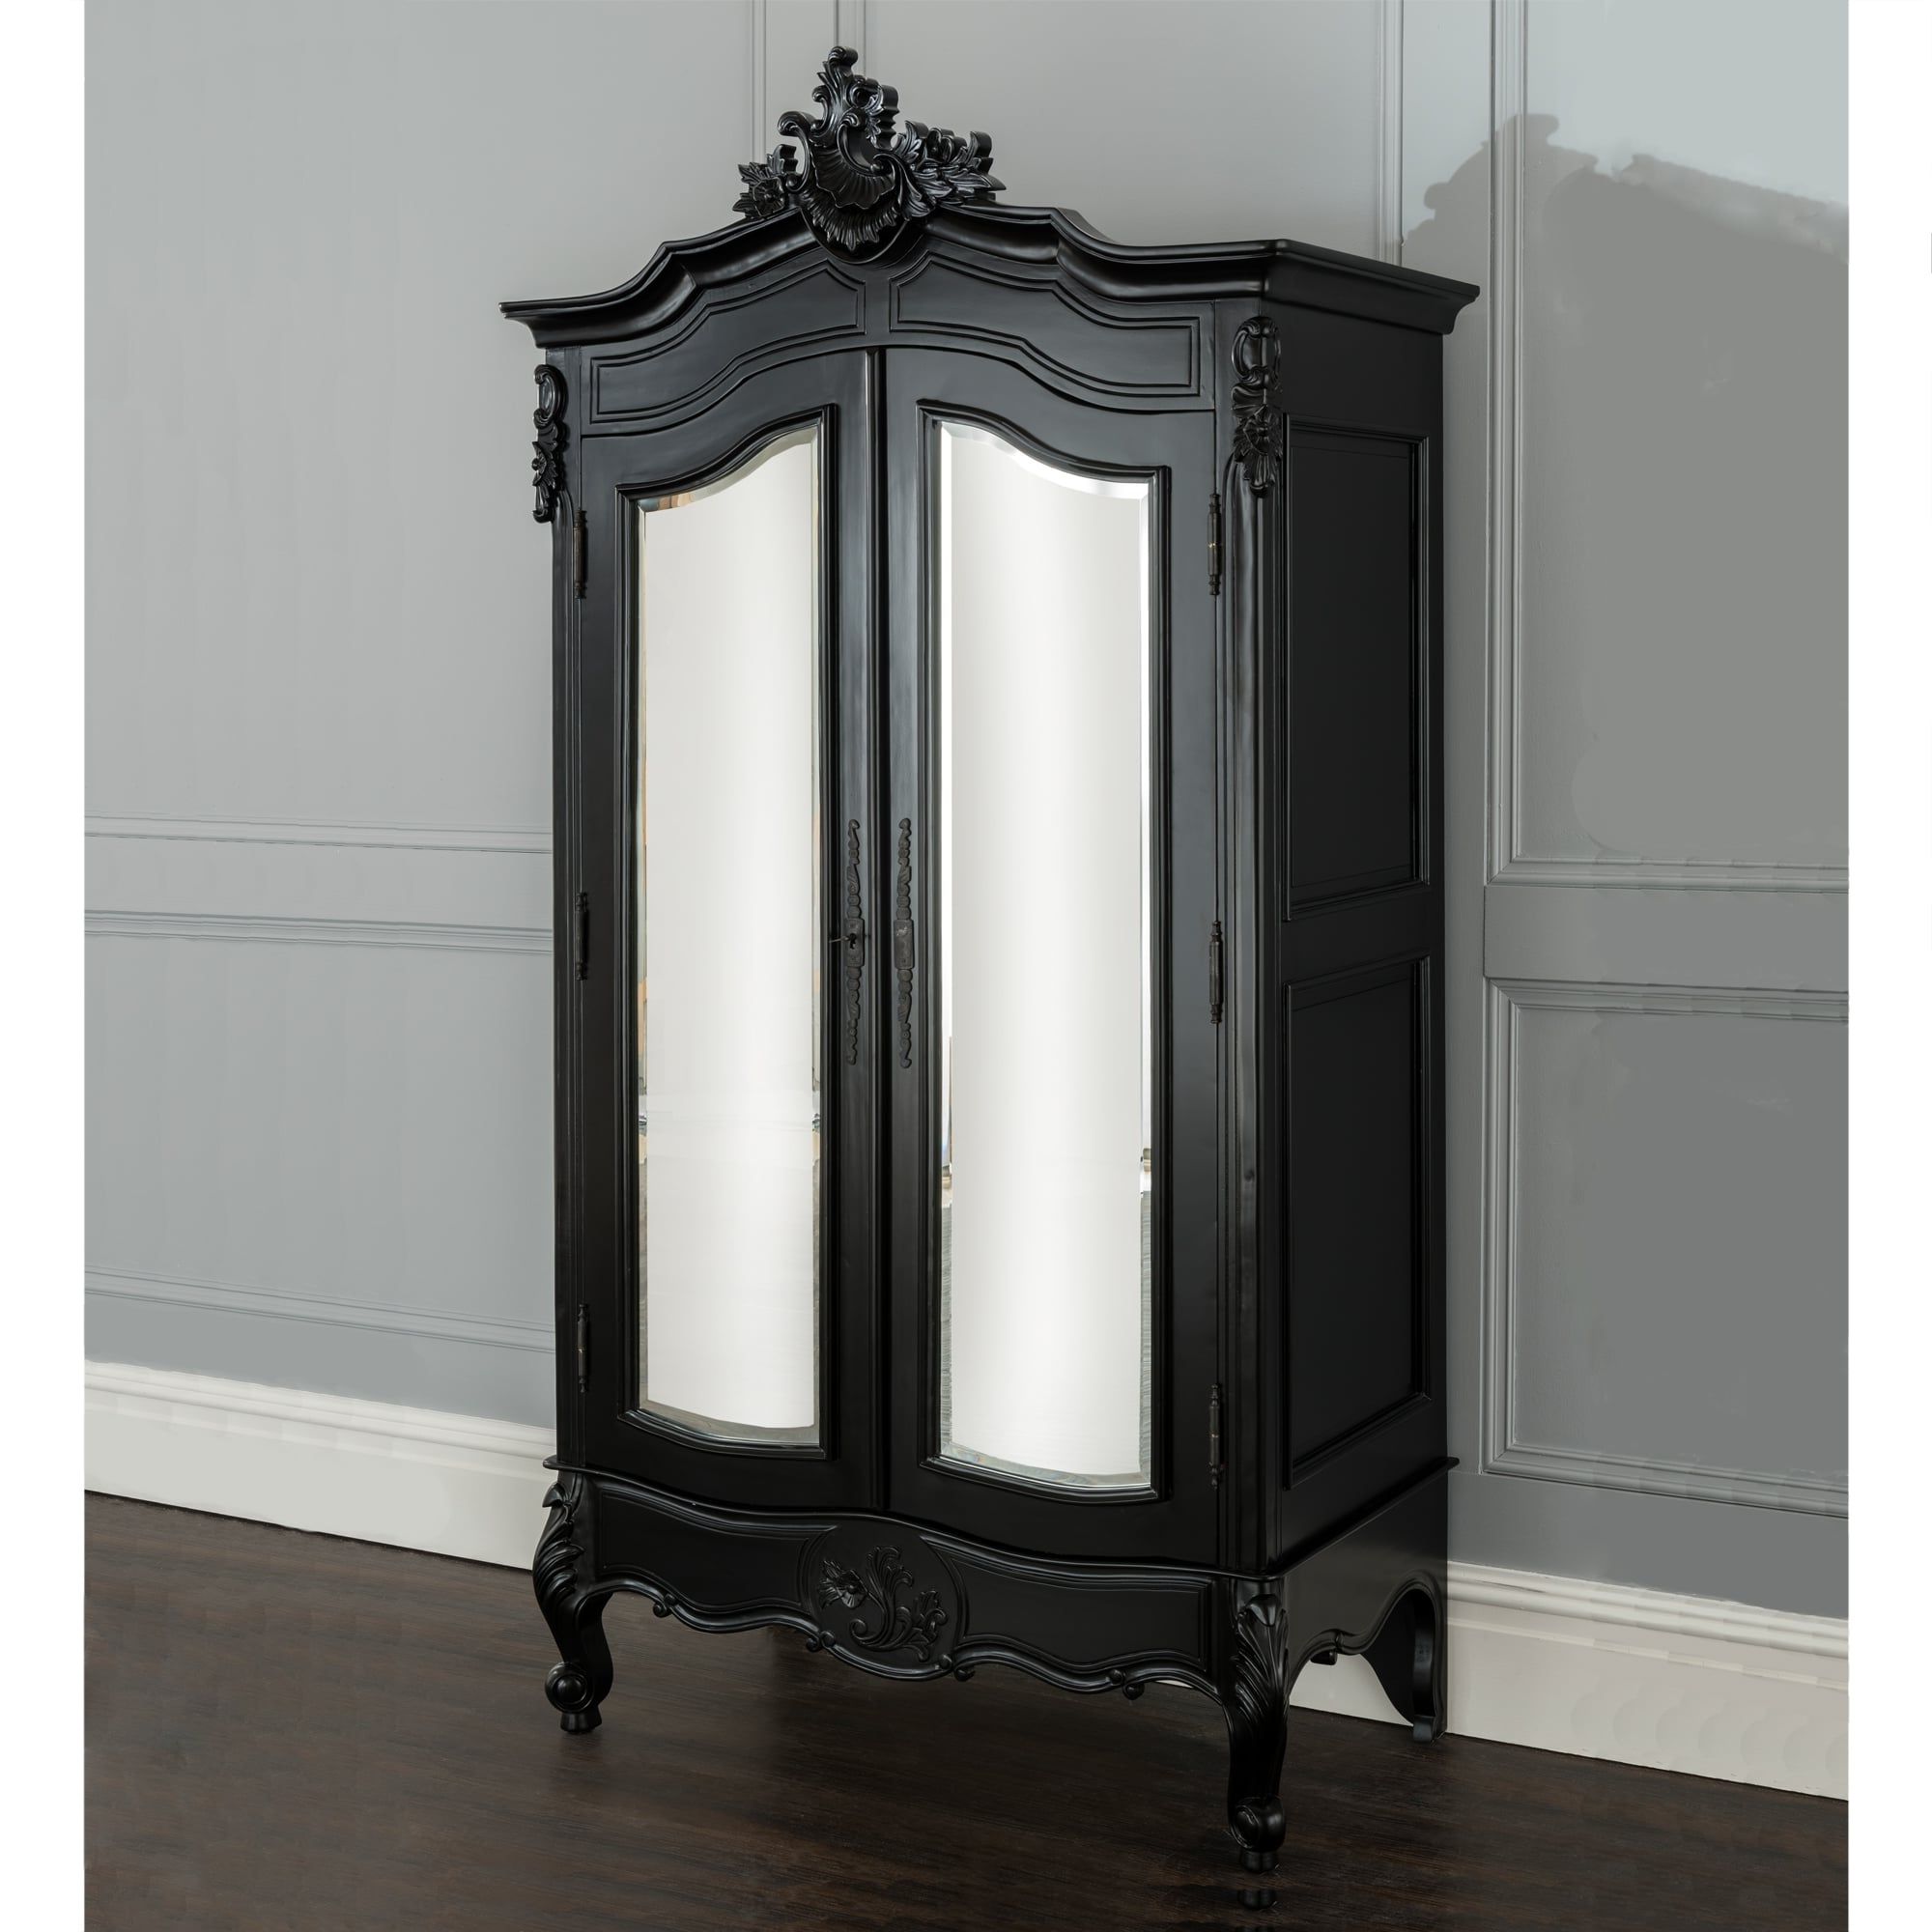 La Rochelle Antique French Wardrobe | Black Furniture Collection Inside Black French Style Wardrobes (Gallery 6 of 20)